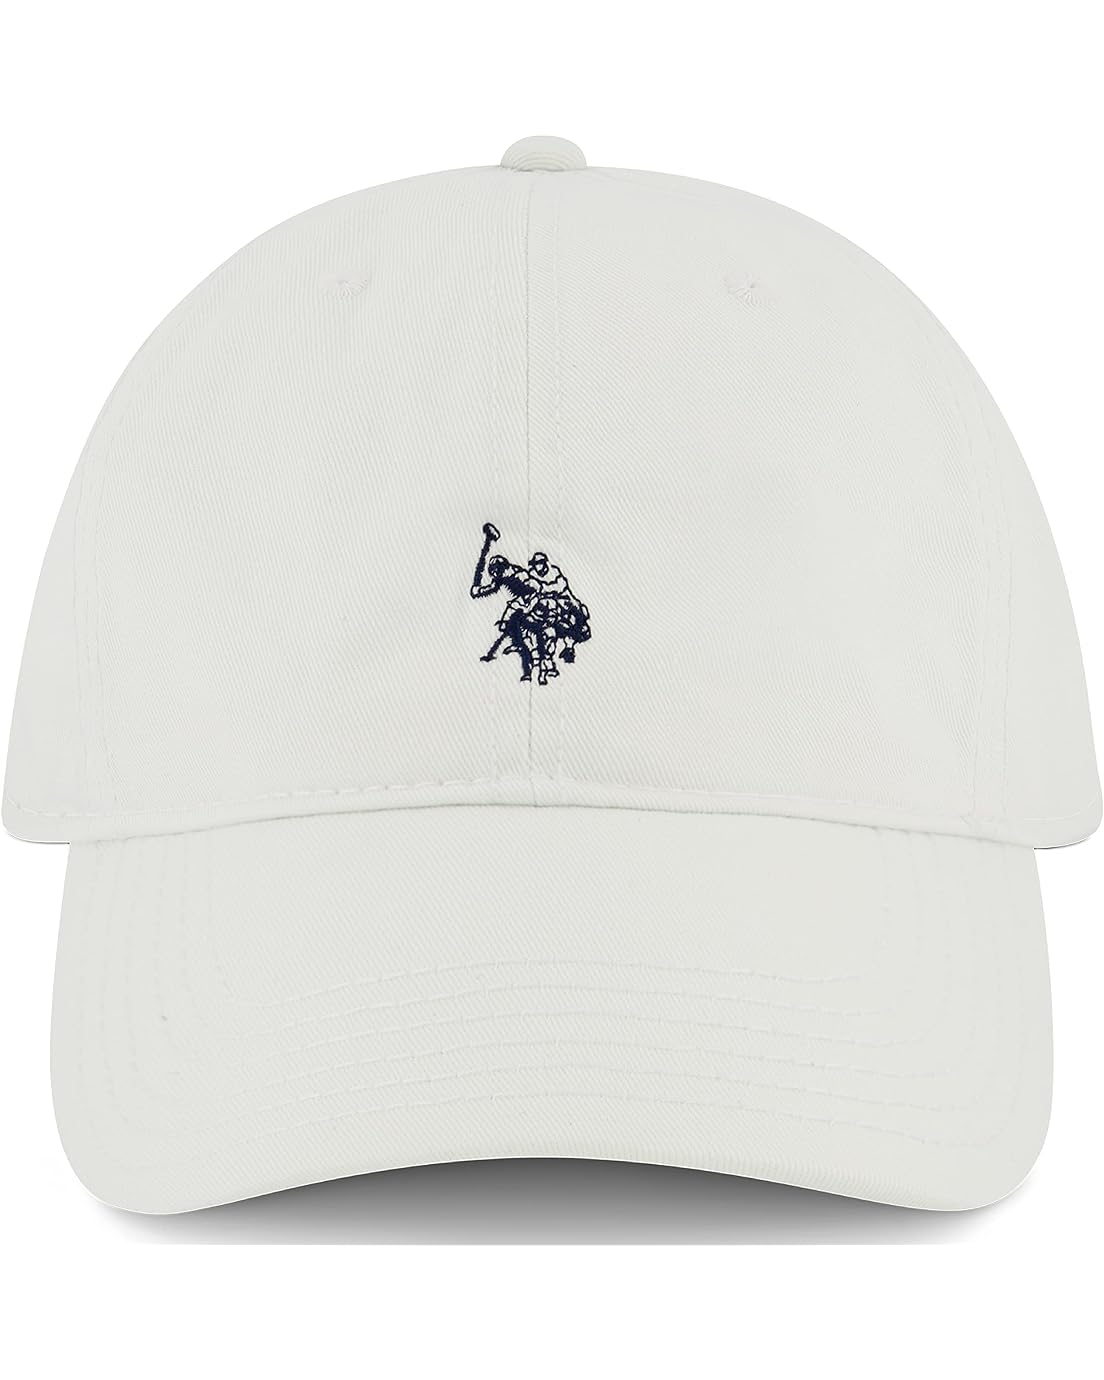 U.S. POLO ASSN. Mens Mens Washed Twill Cotton Adjustable Baseball Hat with Pony Logo and Curved Brim